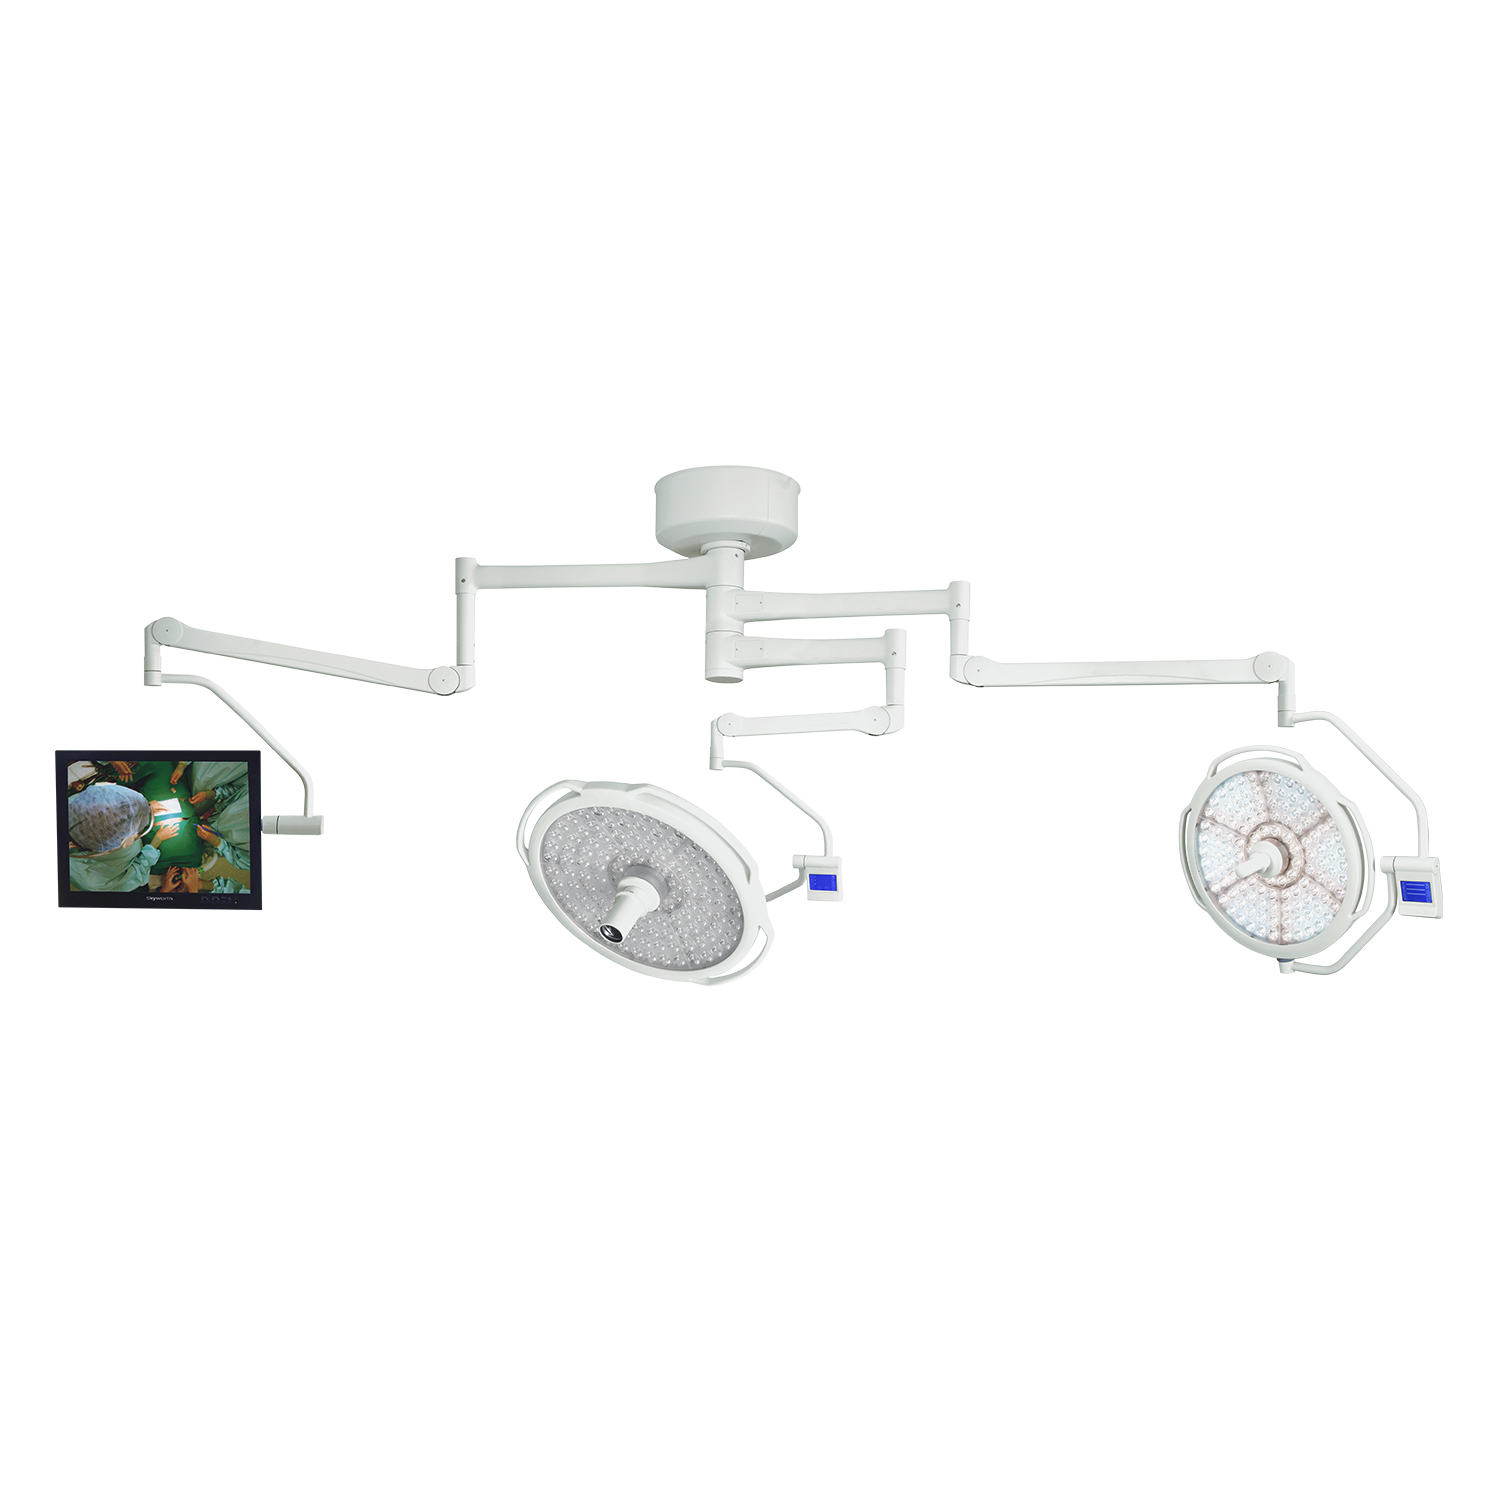 Avante Maxx Luxx LED 160 Surgical Light with Monitor Mounting Arm